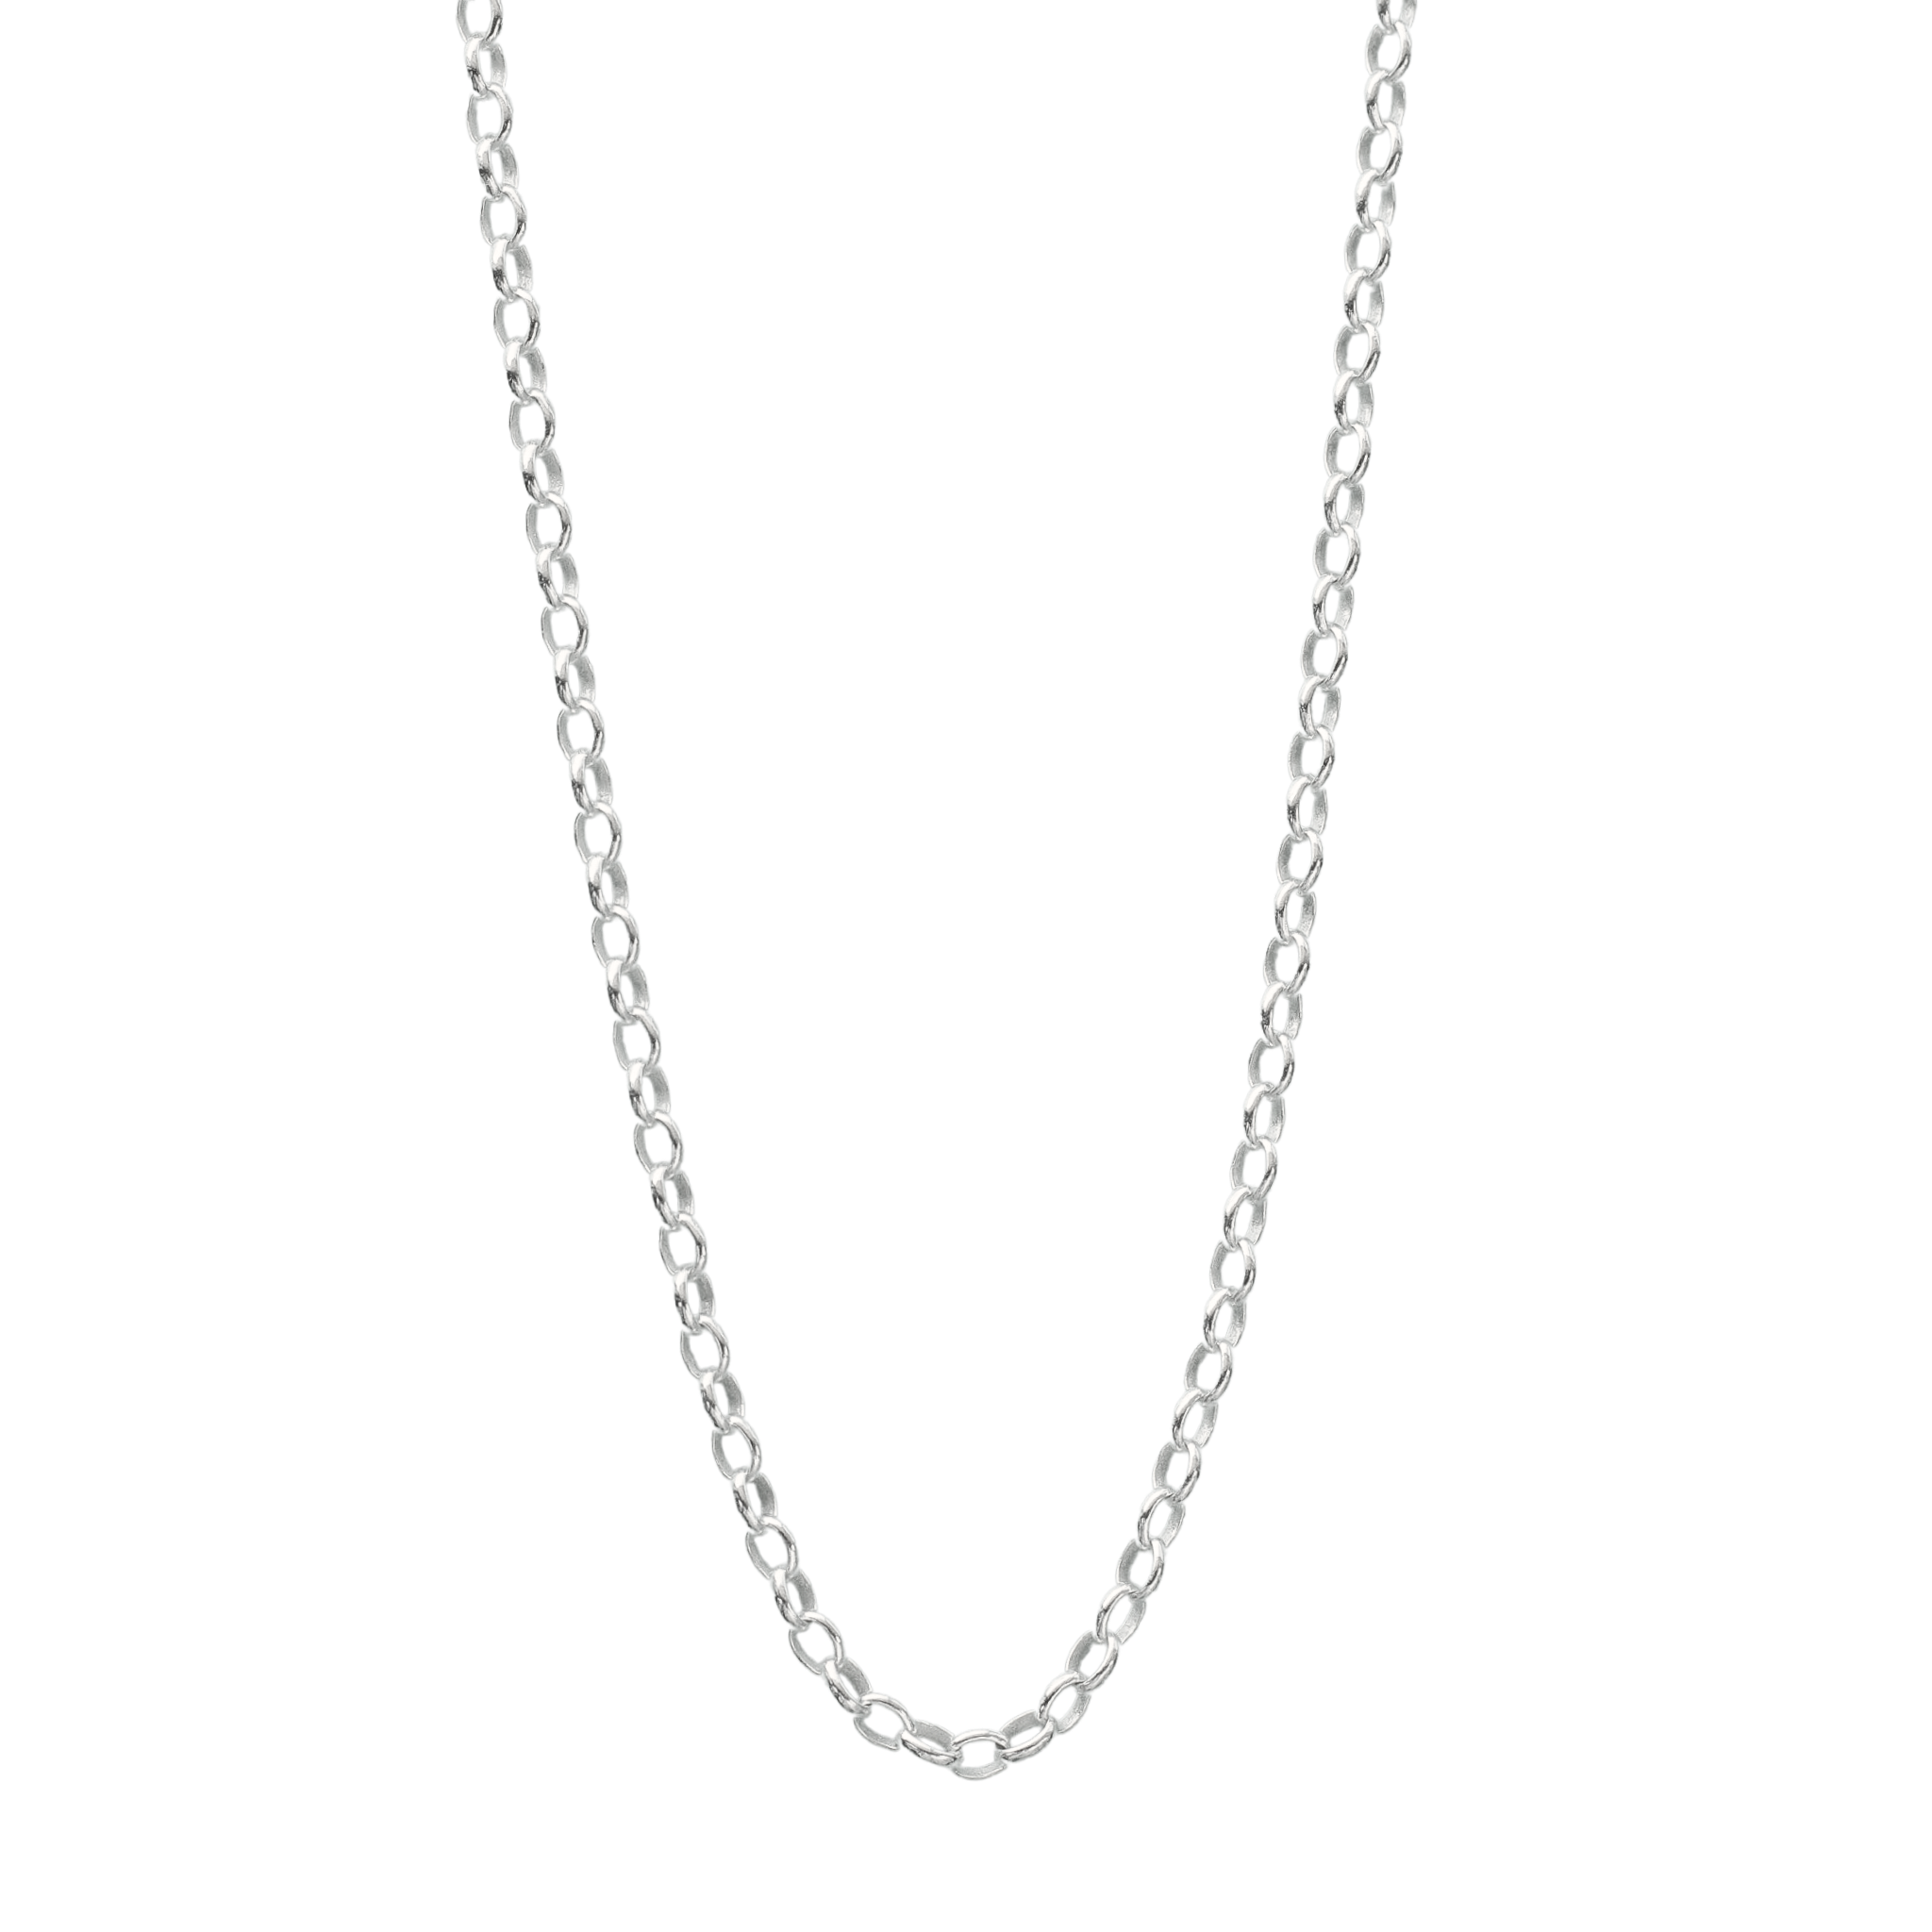 1.5mm Cable Chain Necklace, Recycled Sterling Silver